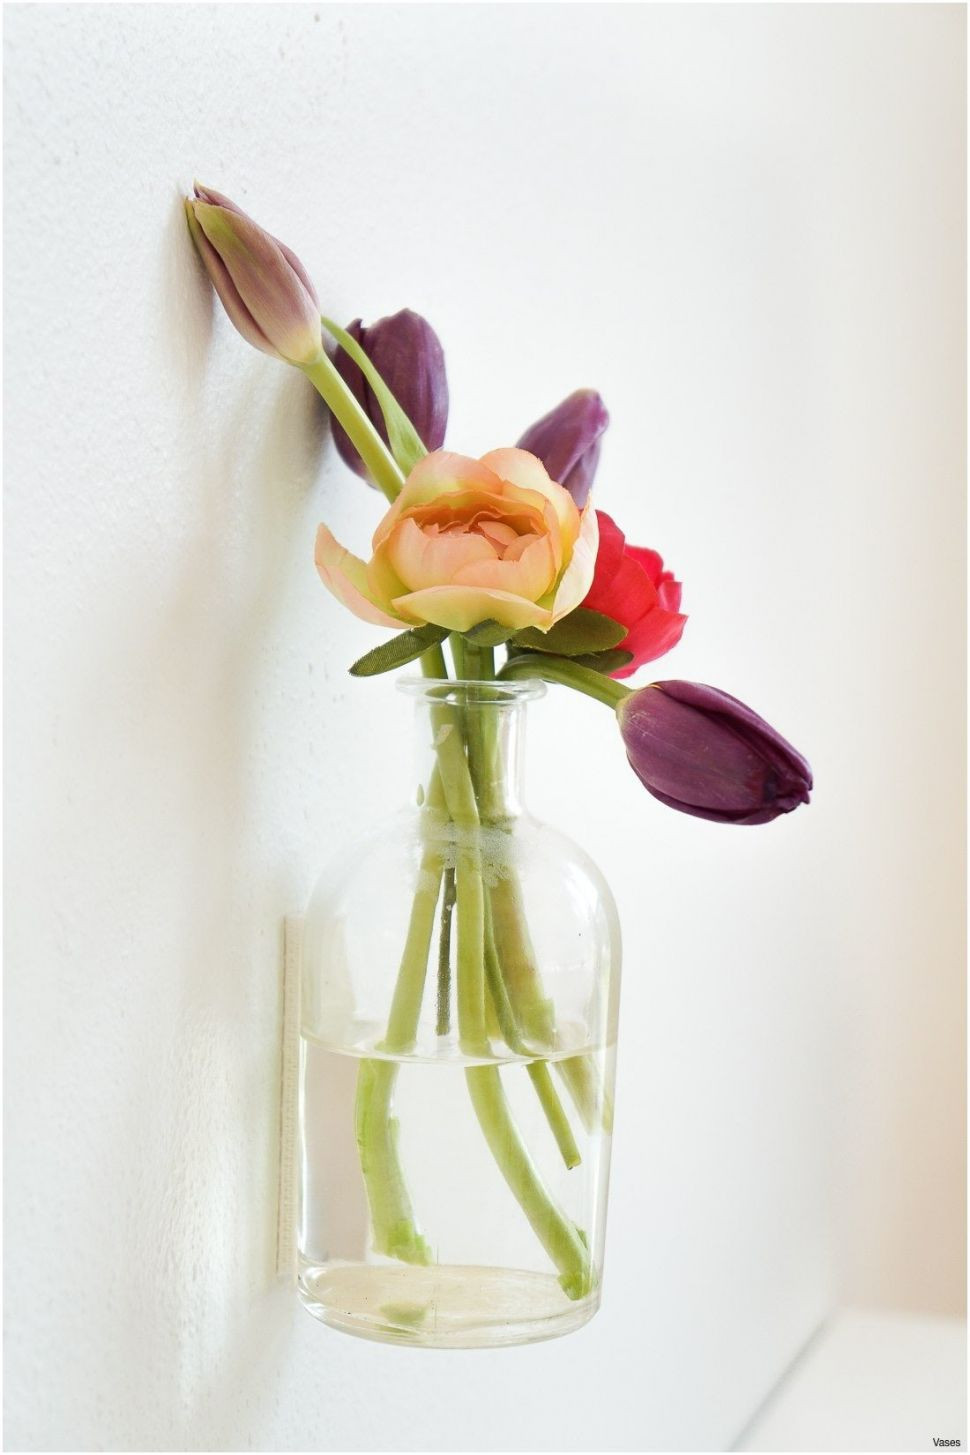 wall bud vase of wall bud vase photos pink silk flowers sensational il fullxfull pertaining to wall bud vase photos pink silk flowers sensational il fullxfull l7e9h vases wall flower of wall